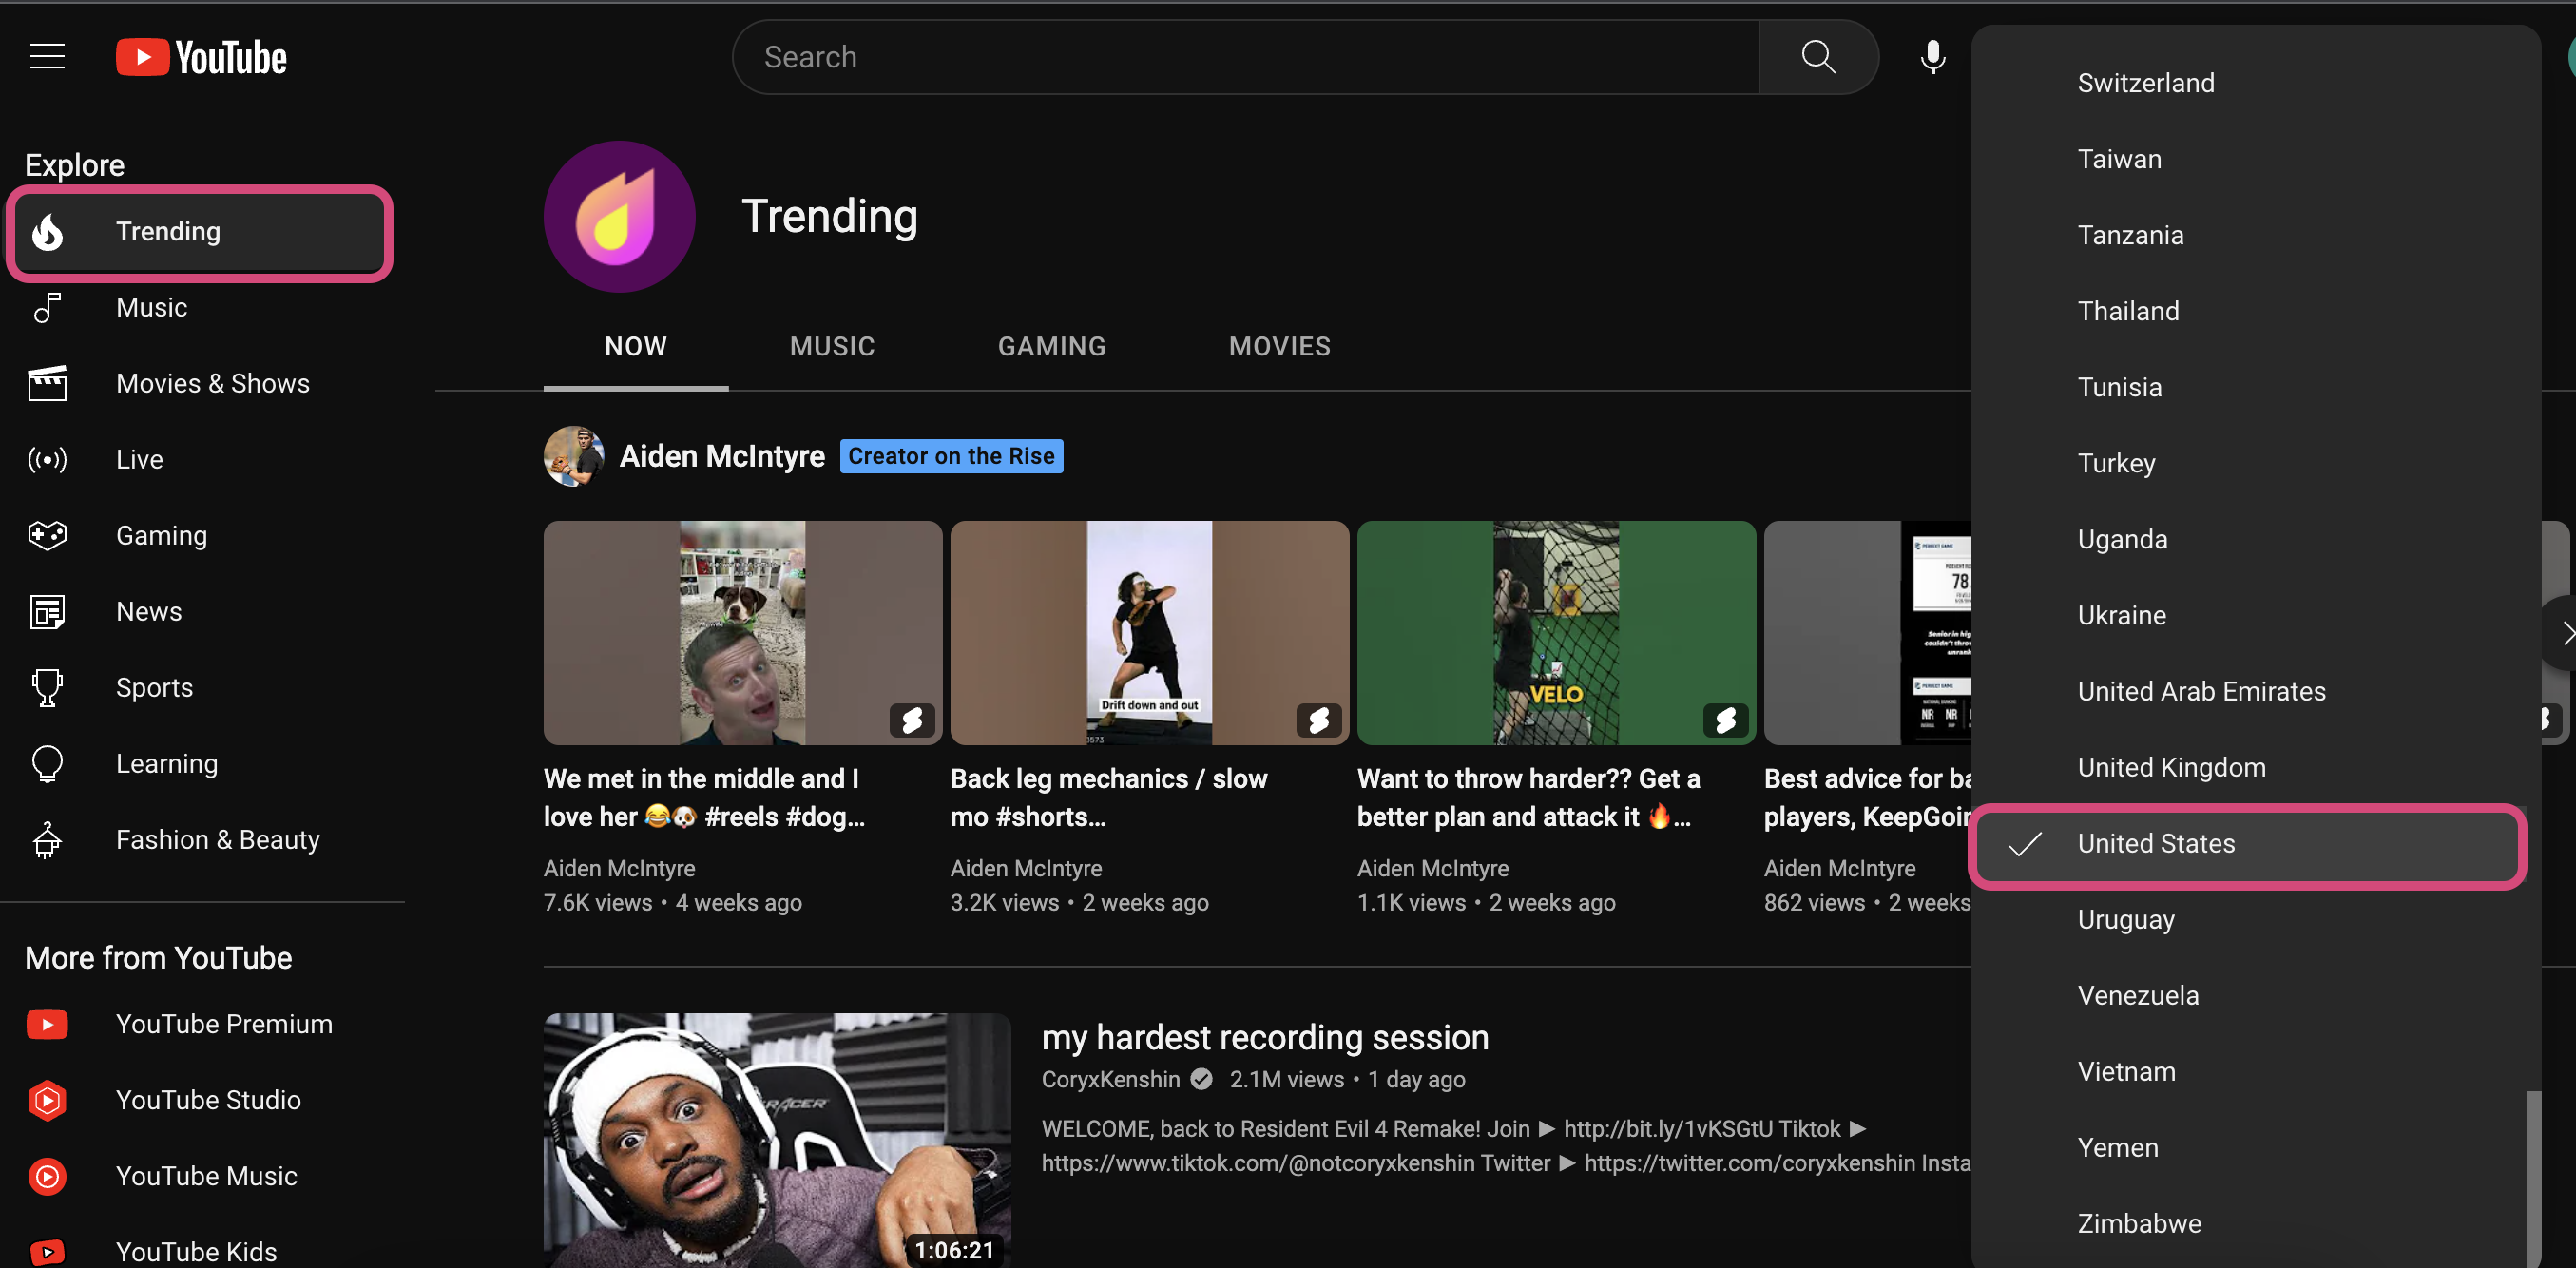 Trending shows popular content or YouTube Trends